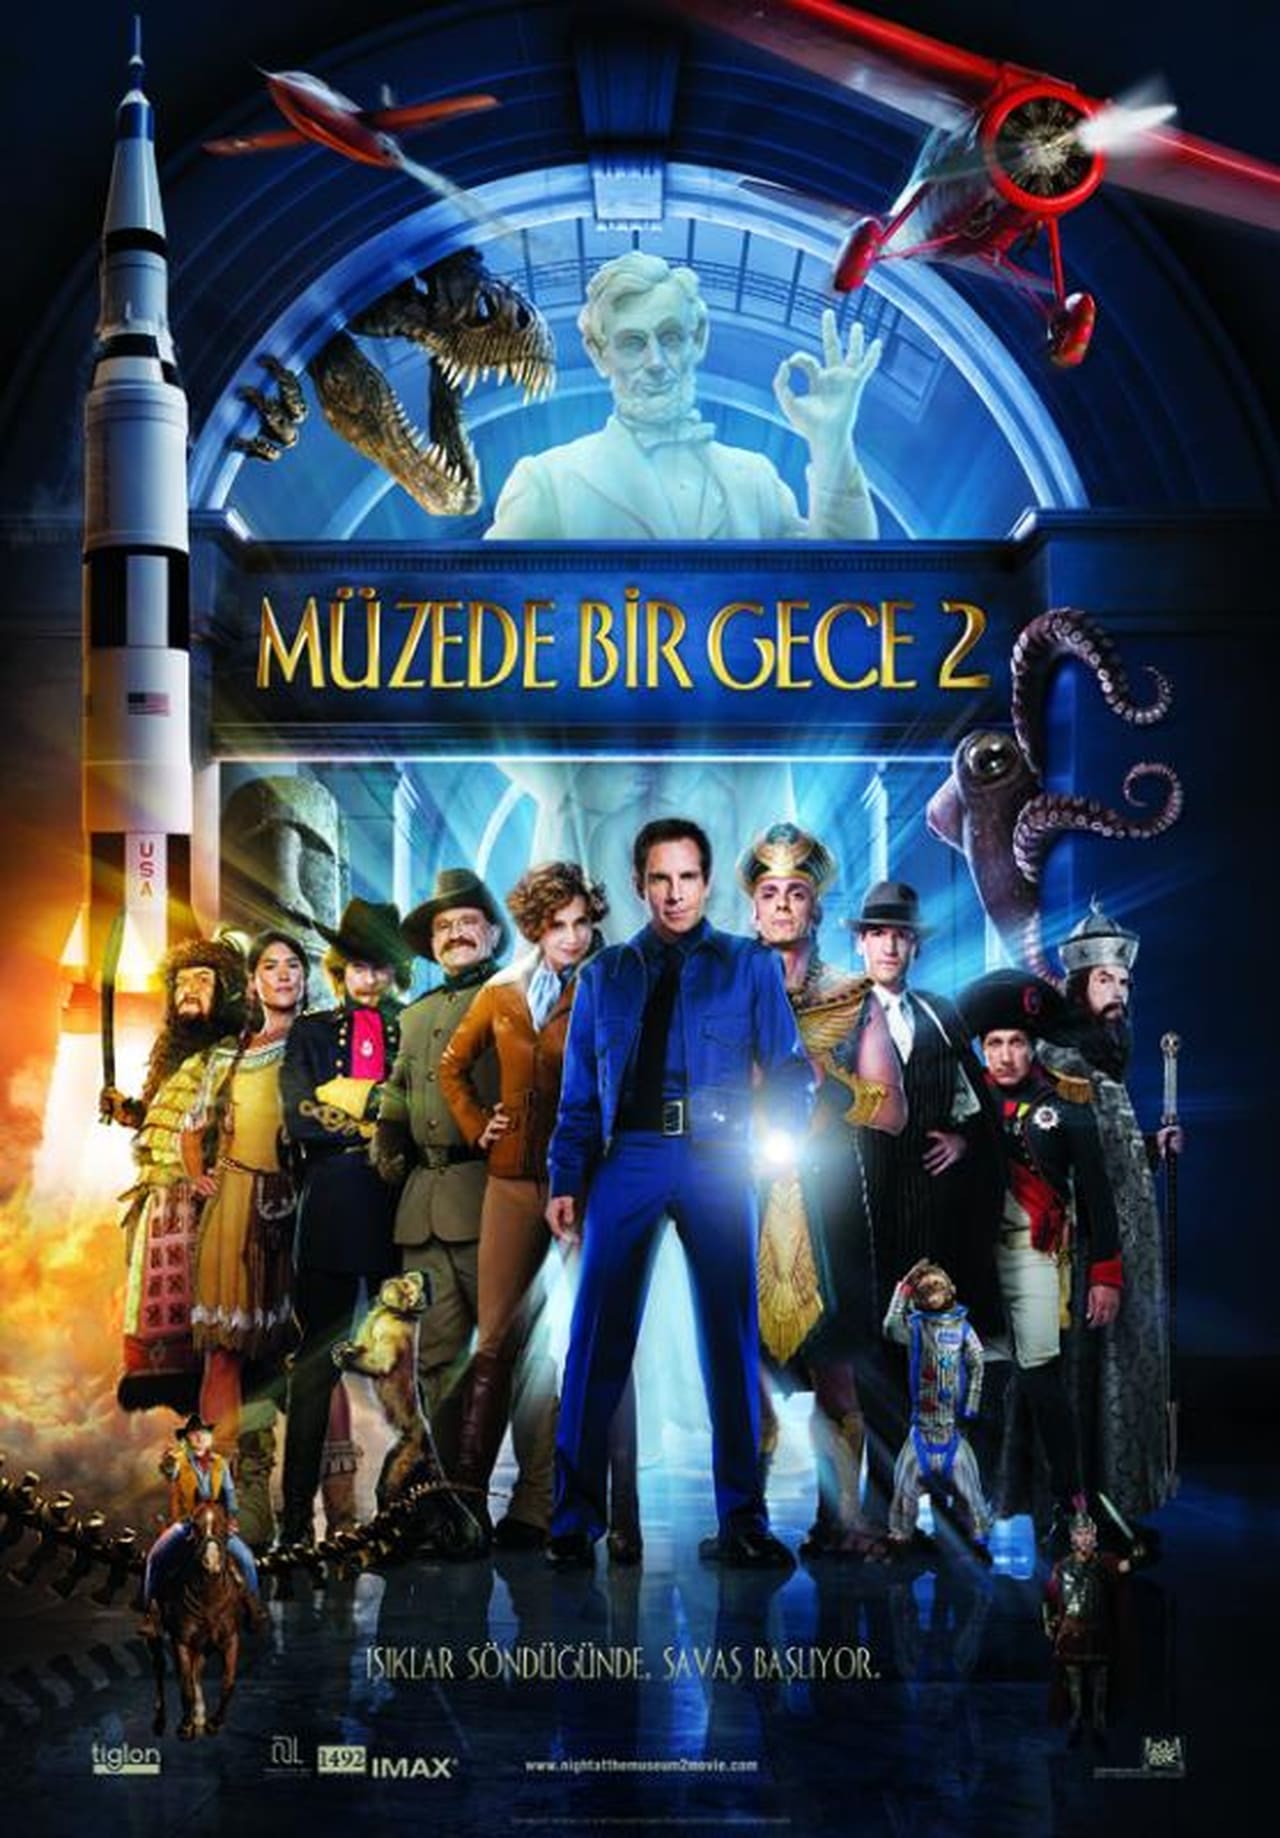 Night at the Museum: Battle of the Smithsonian (2009) 256Kbps 23.976Fps 48Khz 5.1Ch Disney+ DD+ E-AC3 Turkish Audio TAC